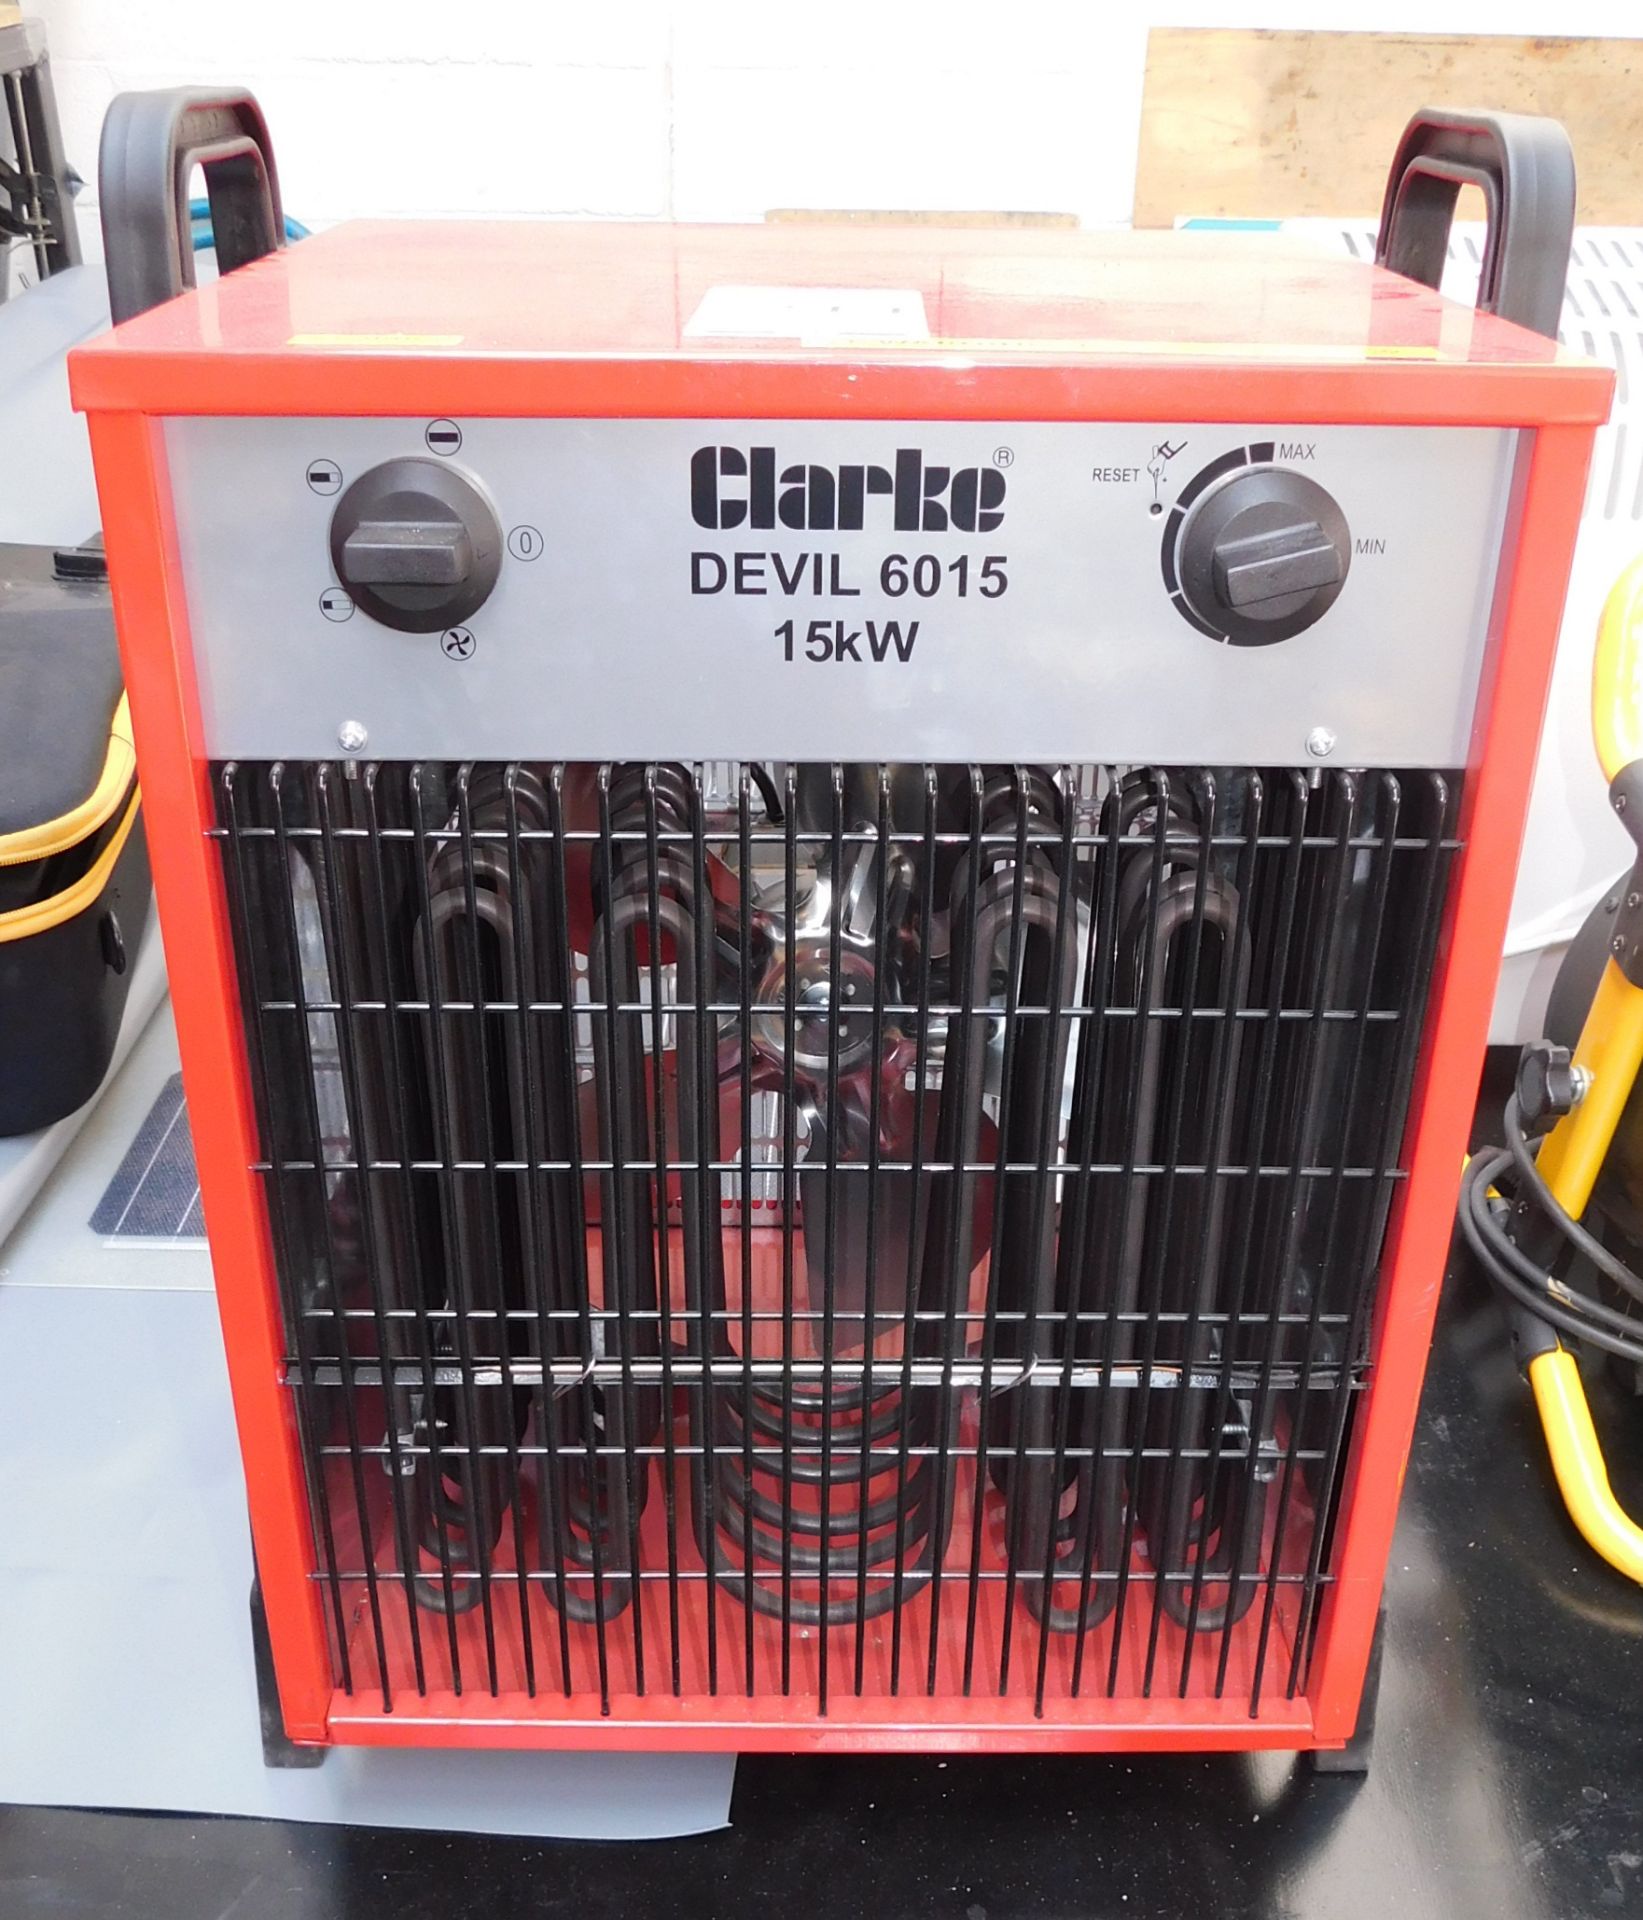 Clarke Devil 6015 15kw Space Heater (Location: Kettering - See General Notes for More Details)